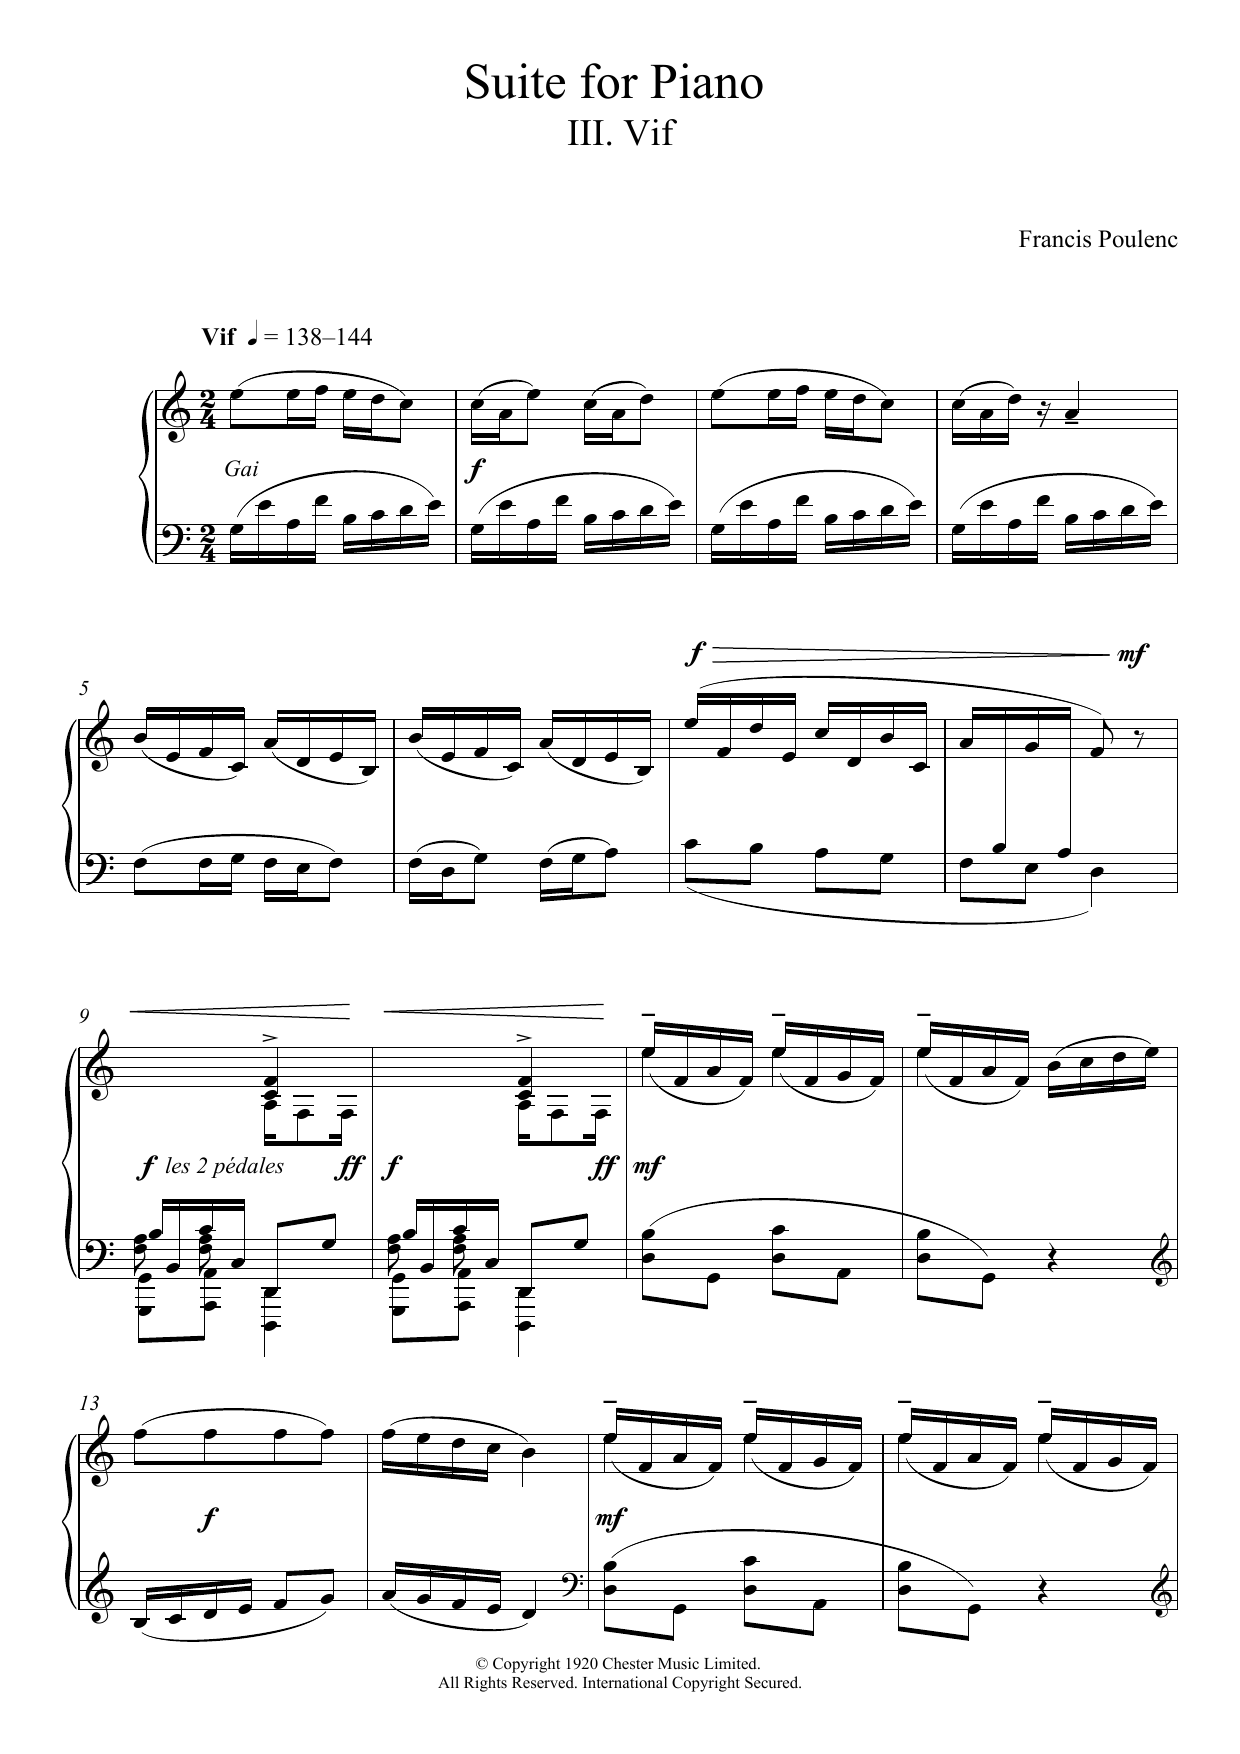 Download Francis Poulenc Suite for Piano - III. Vif Sheet Music